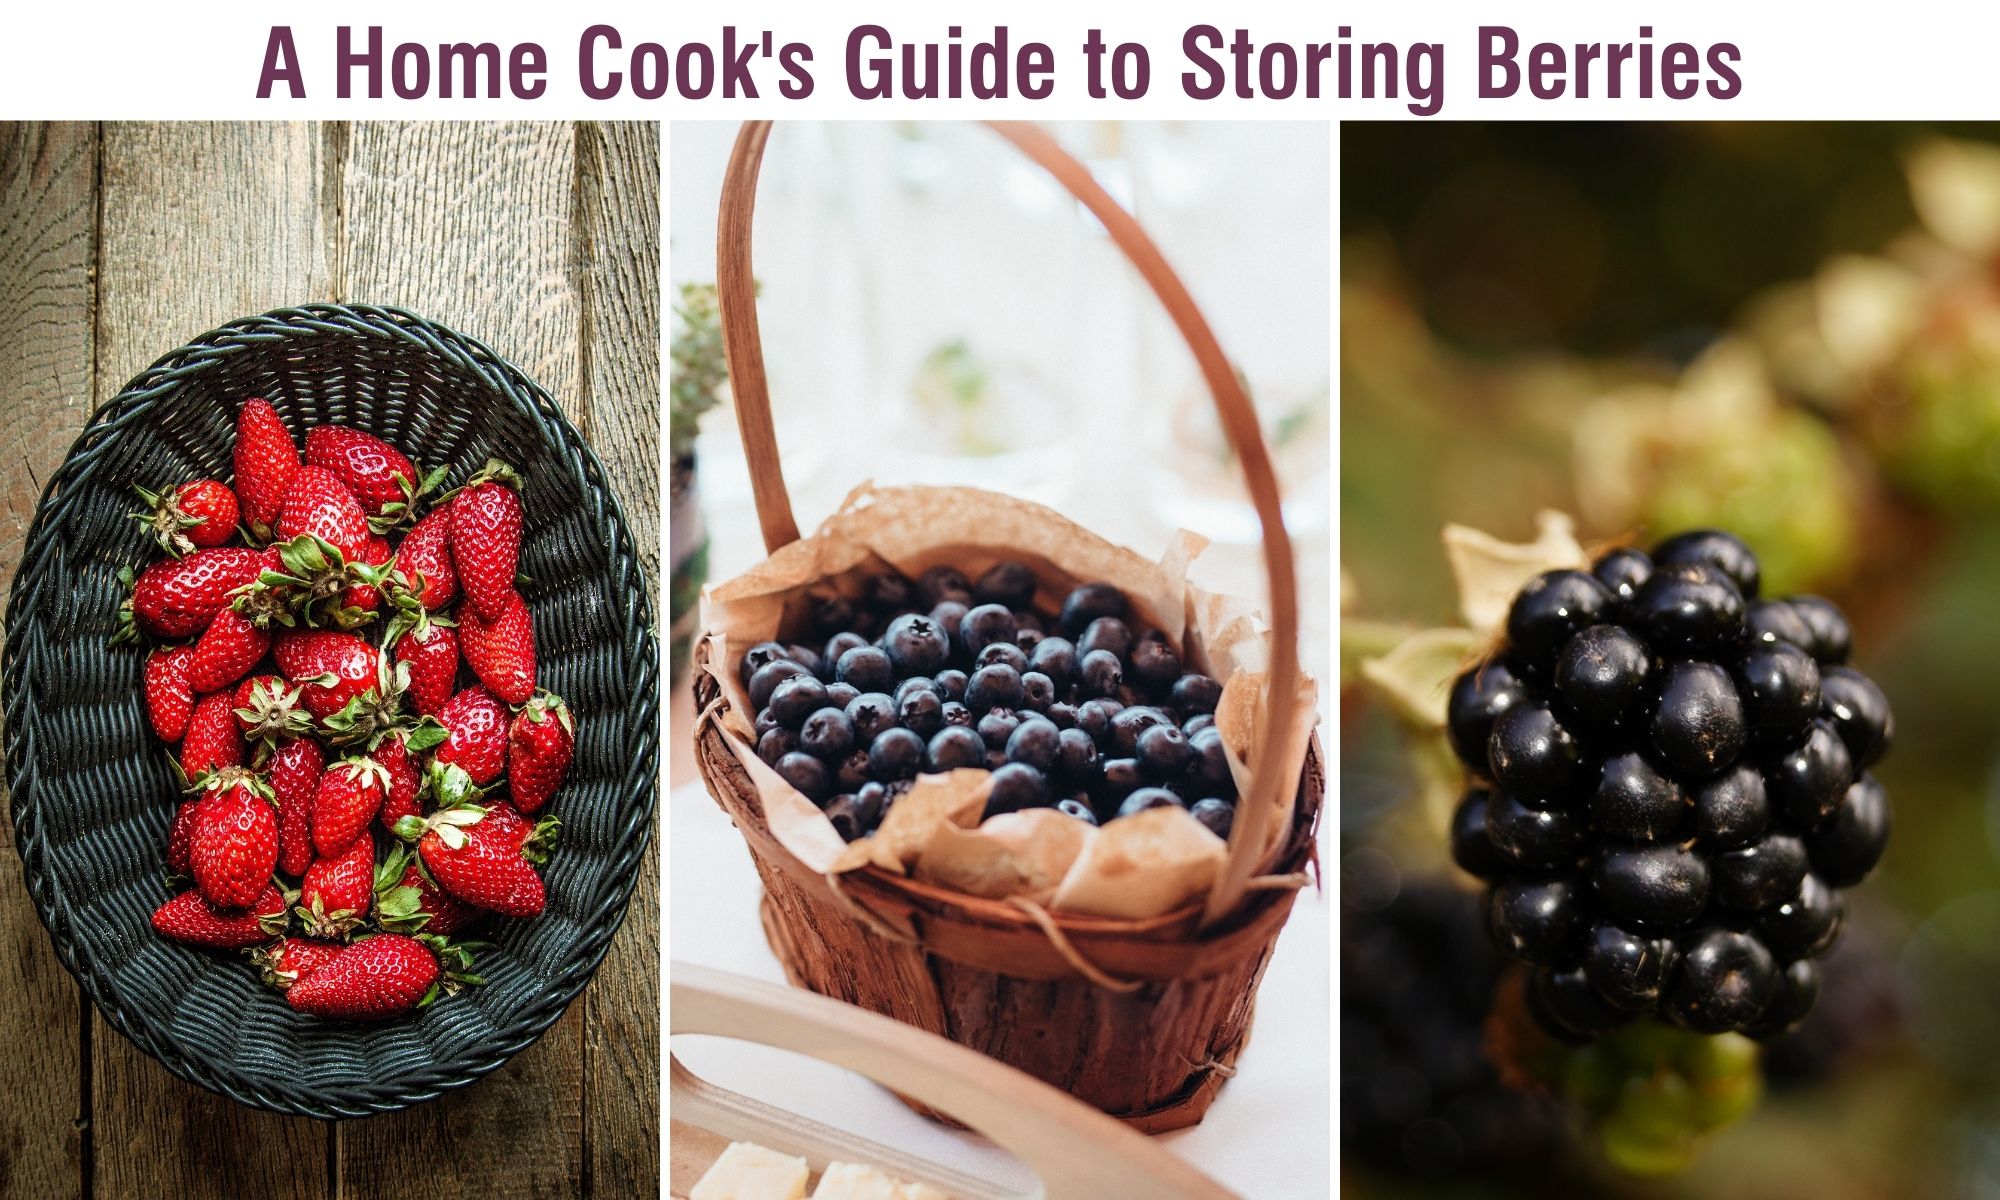 Three pictures of berries with text saying "a home cook's guide to storing berries" above them.